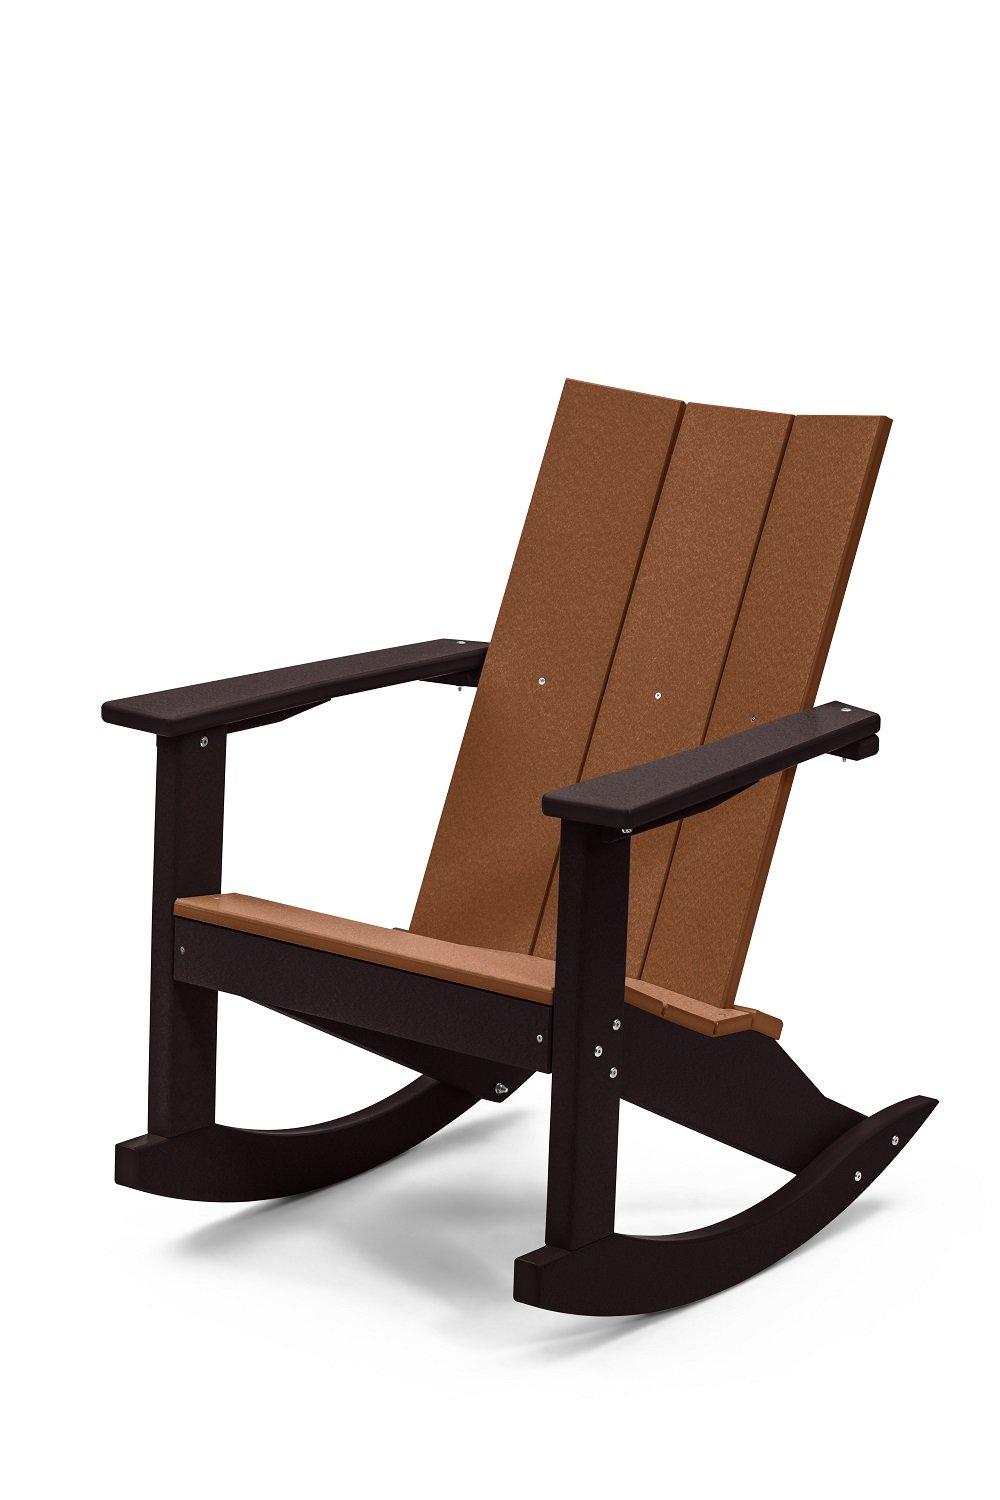 Perfect Choice Furniture Recycled Plastic Stanton Adirondack Rocking Chair - LEAD TIME TO SHIP 4 WEEKS OR LESS